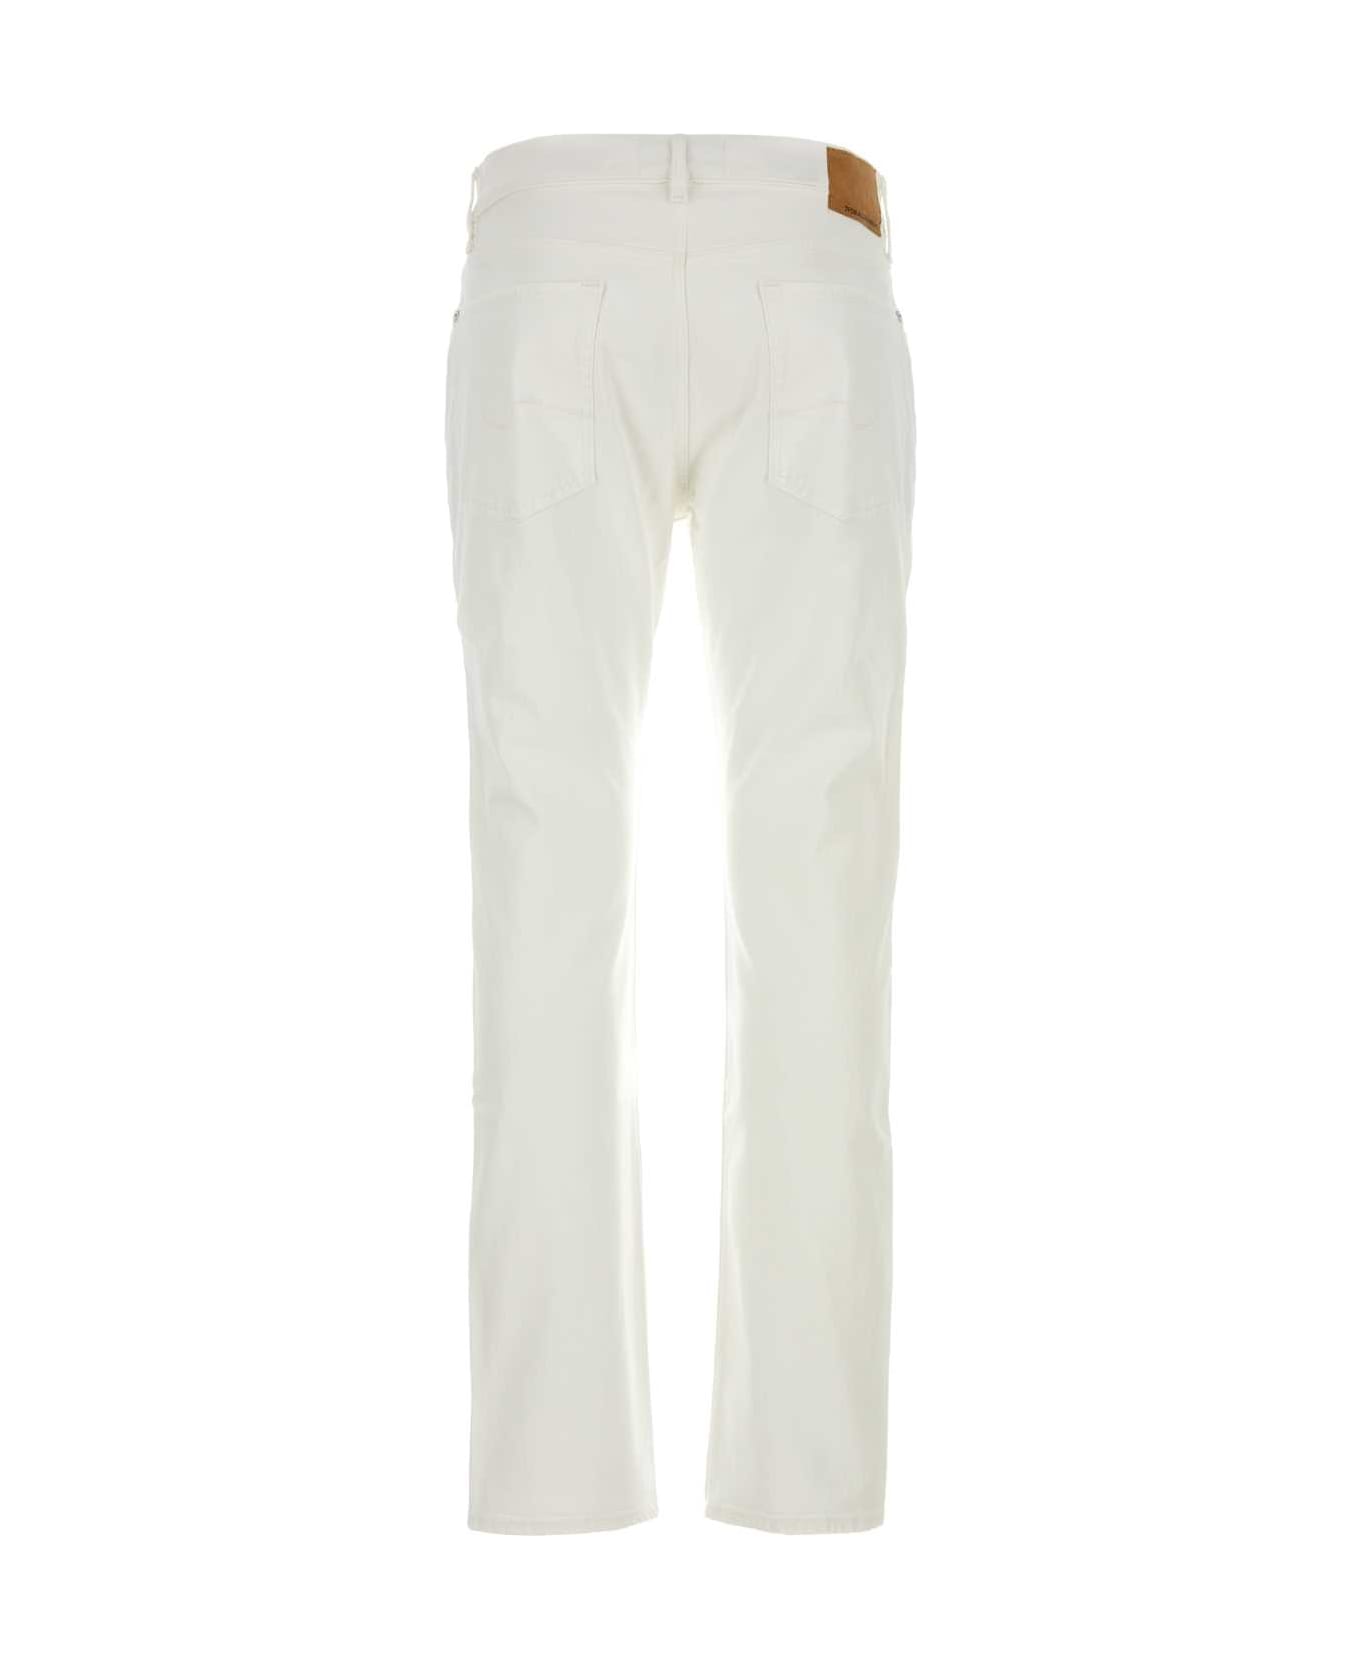 7 For All Mankind White Stretch Denim The Straight Jeans - BIANCO